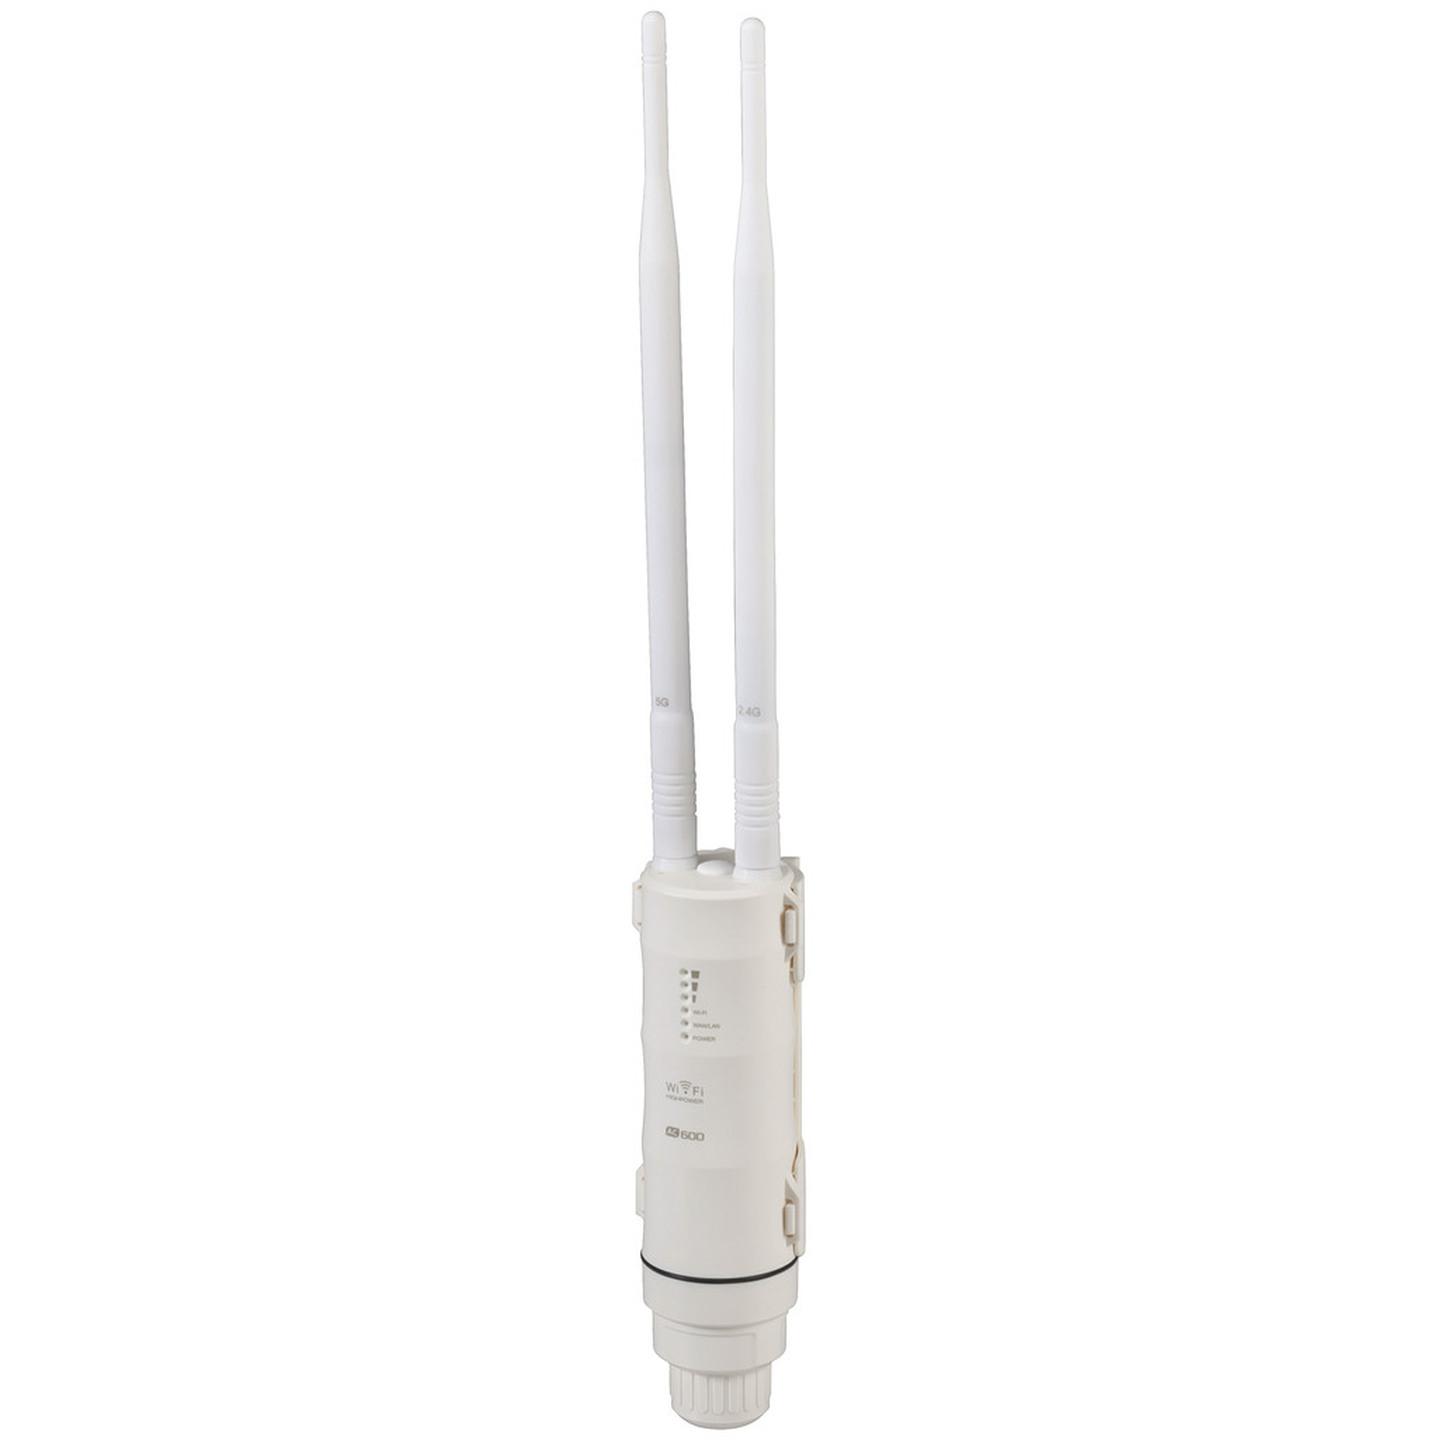 AC600 Outdoor Wi-Fi Extender with POE